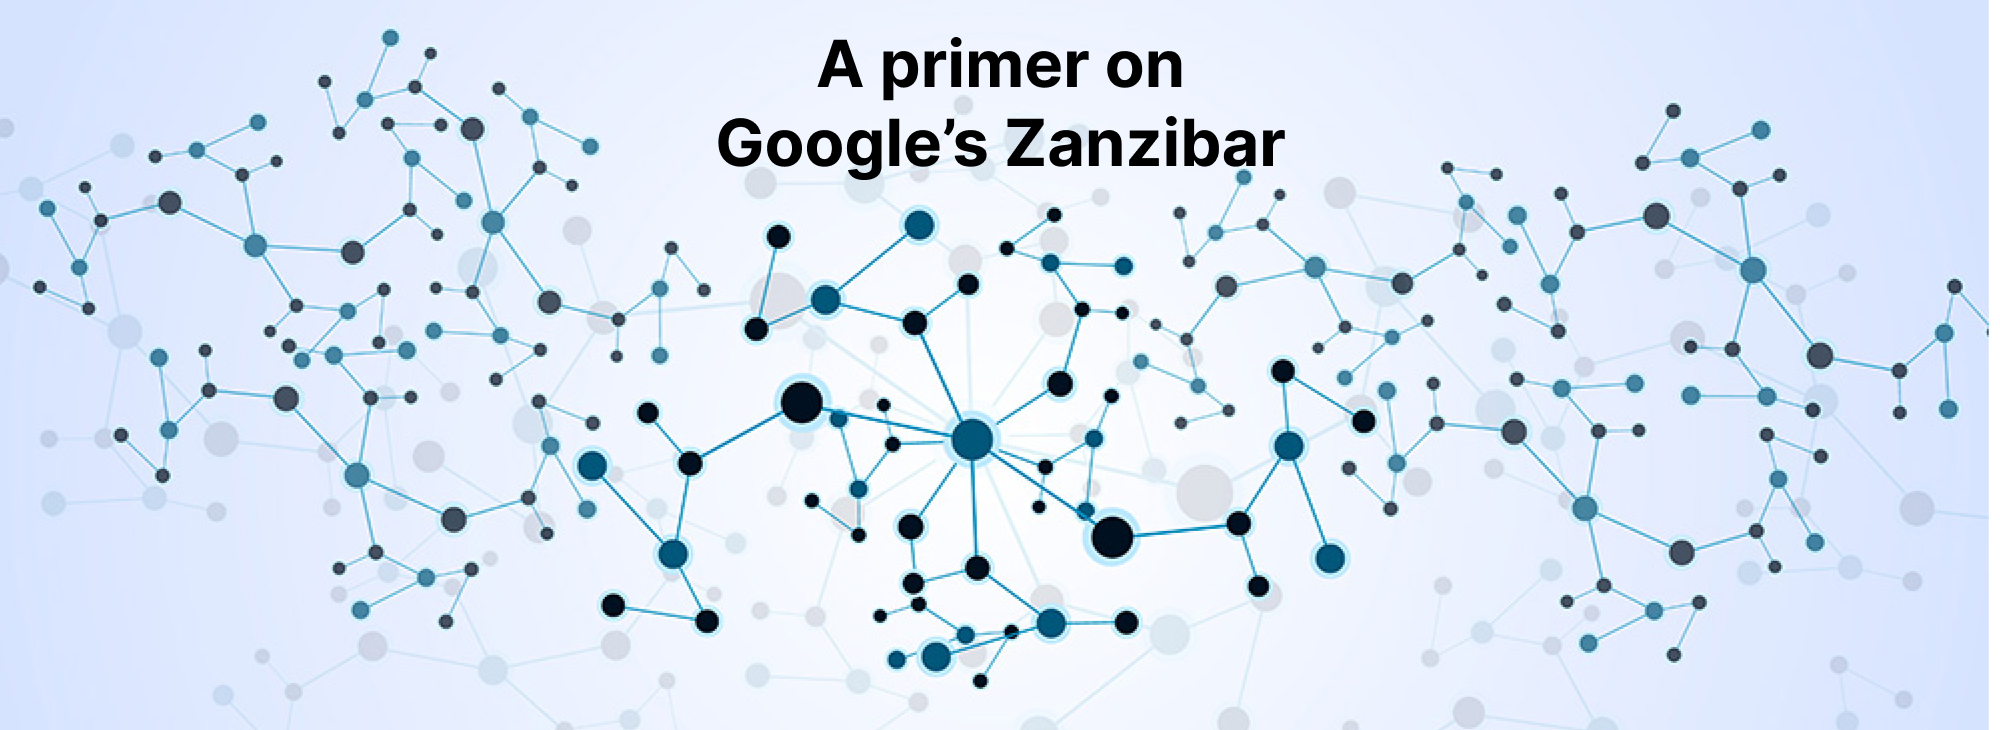 A look into Google's Zanzibar Relationship-Based Access Control System